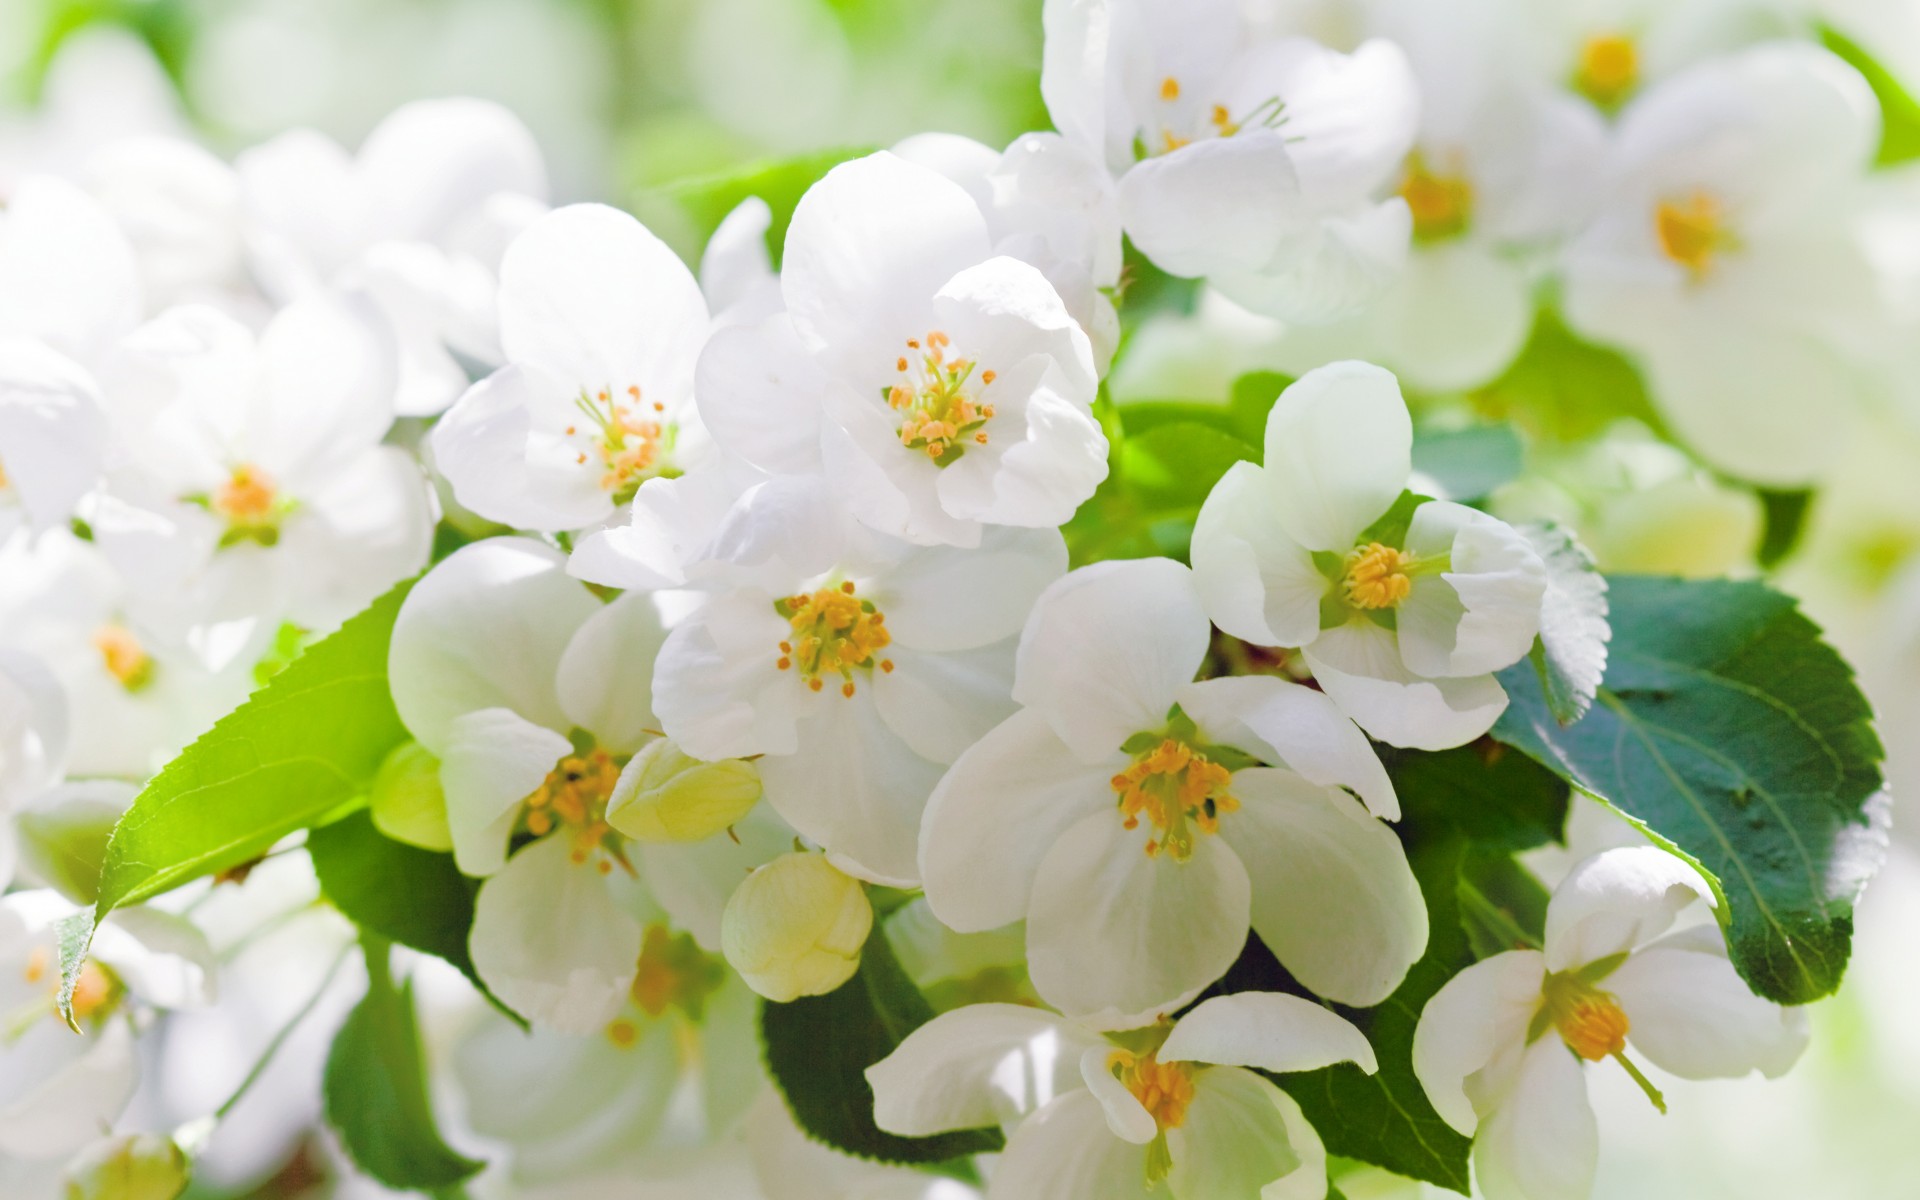 cherry, Blossoms, Flowers, White, Petals, Leaves, Branches, Trees, Spring Wallpaper